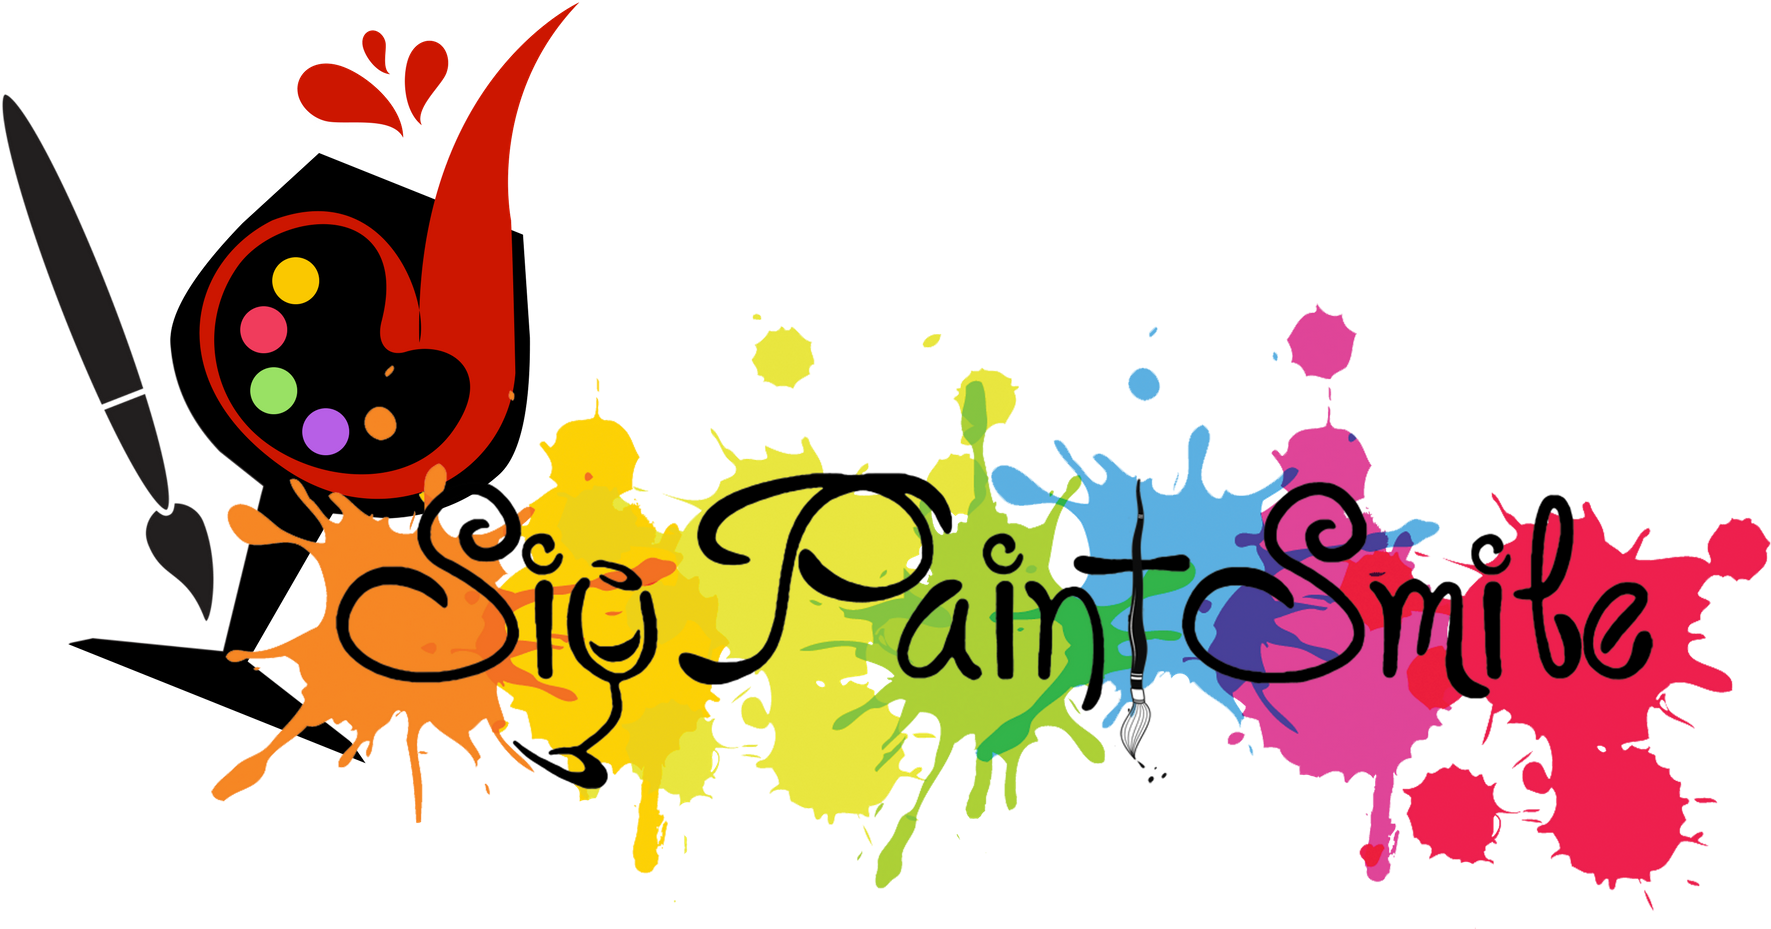 Download and share clipart about Painting Paint & Sip Studio New Yo...